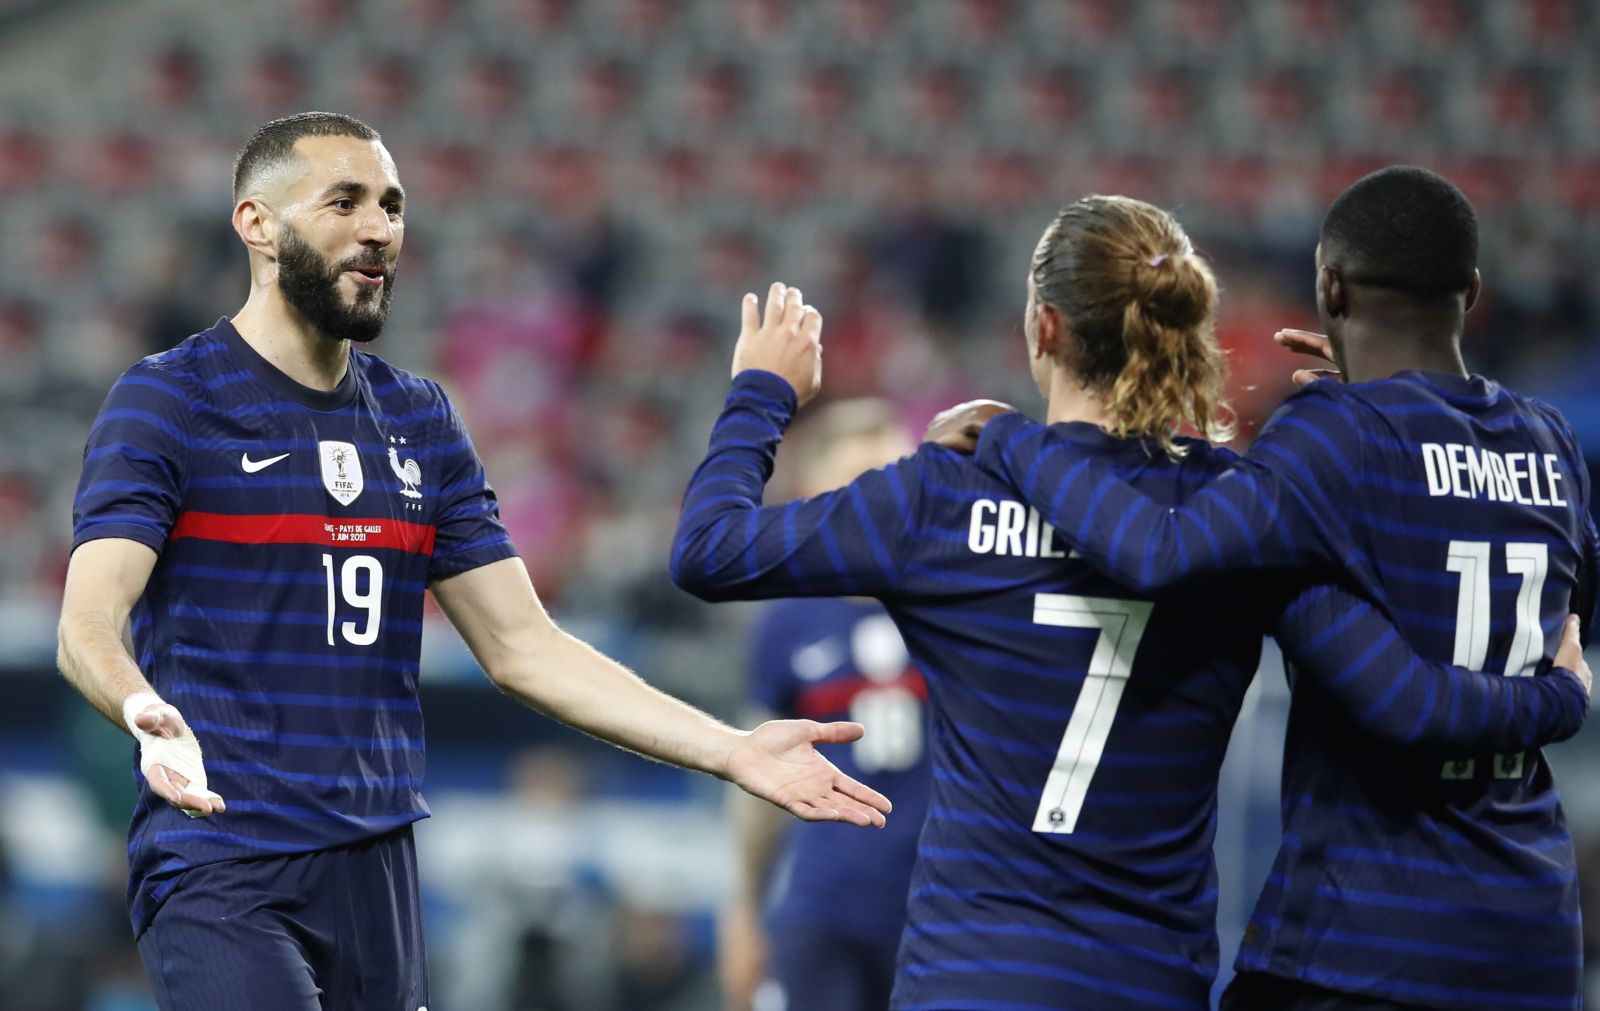 epa09243980 Ousmane Dembele (R) of France celebrates with teammates Karim Benzema (L) and Antoine Griezmann (C) after scoring the 3-0 lead during the International Friendly soccer match between France and Wales in Nice, France, 02 June 2021.  EPA/SEBASTIEN NOGIER